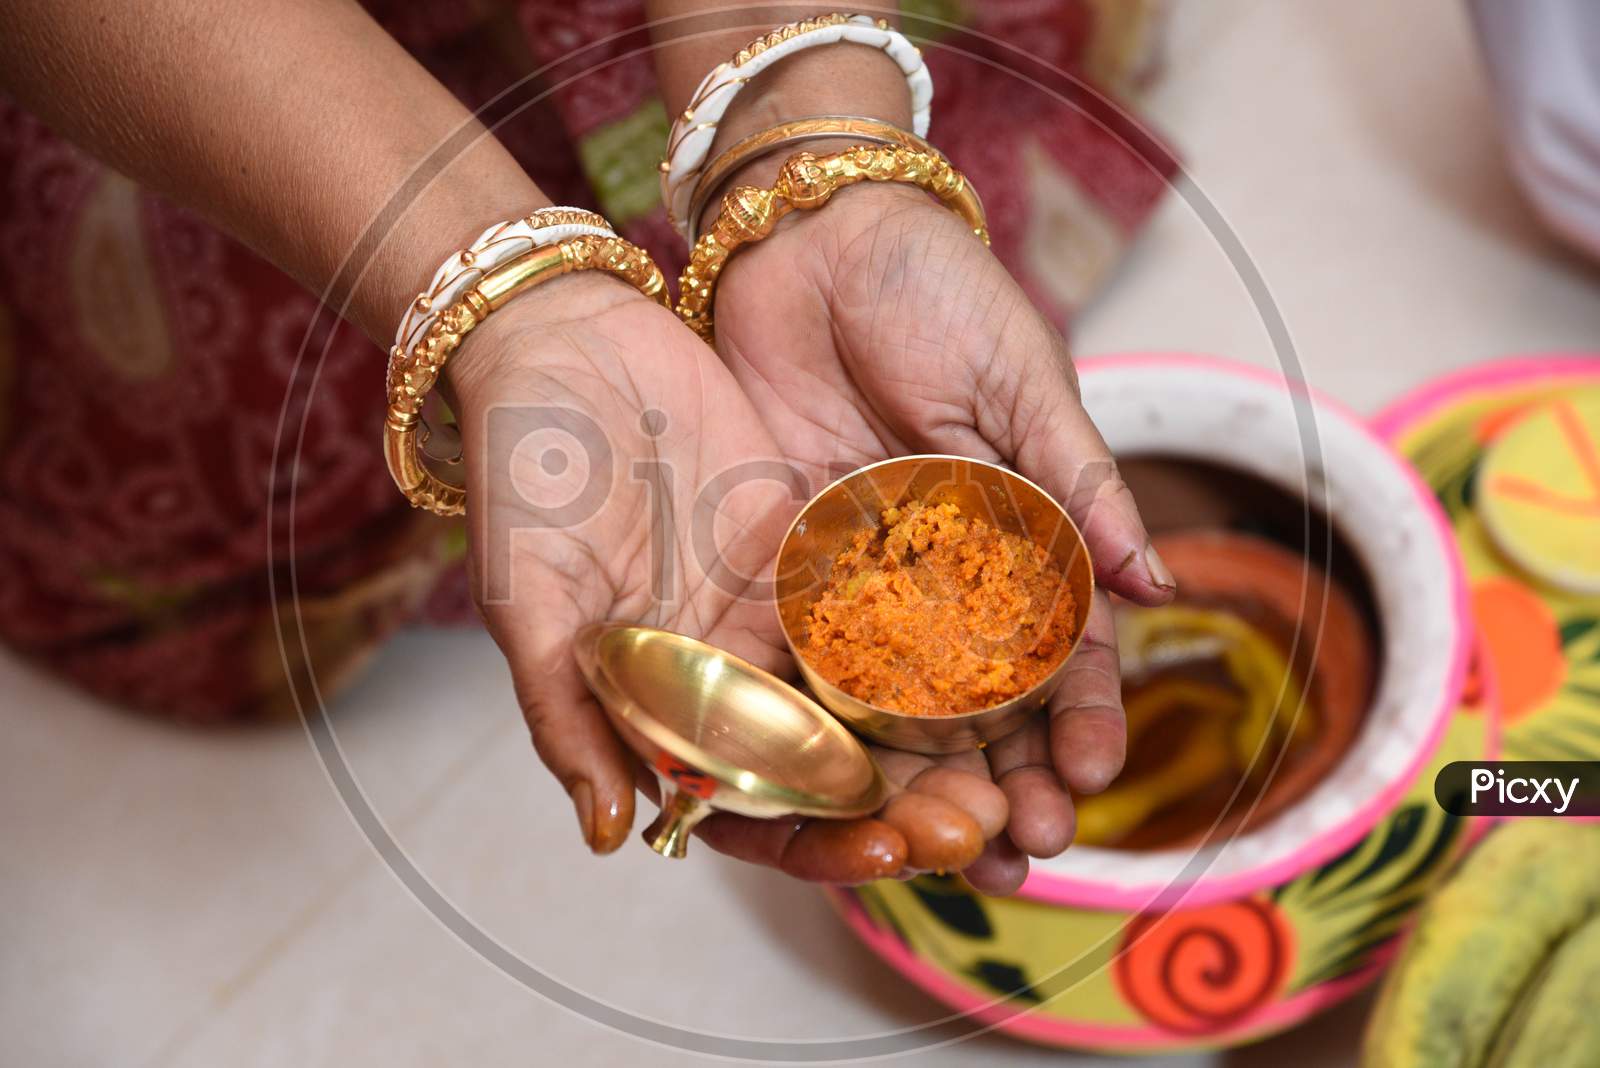 Showing Of Haldi Or Turmeric Paste In Indian Bengali Marriage Ceremony.